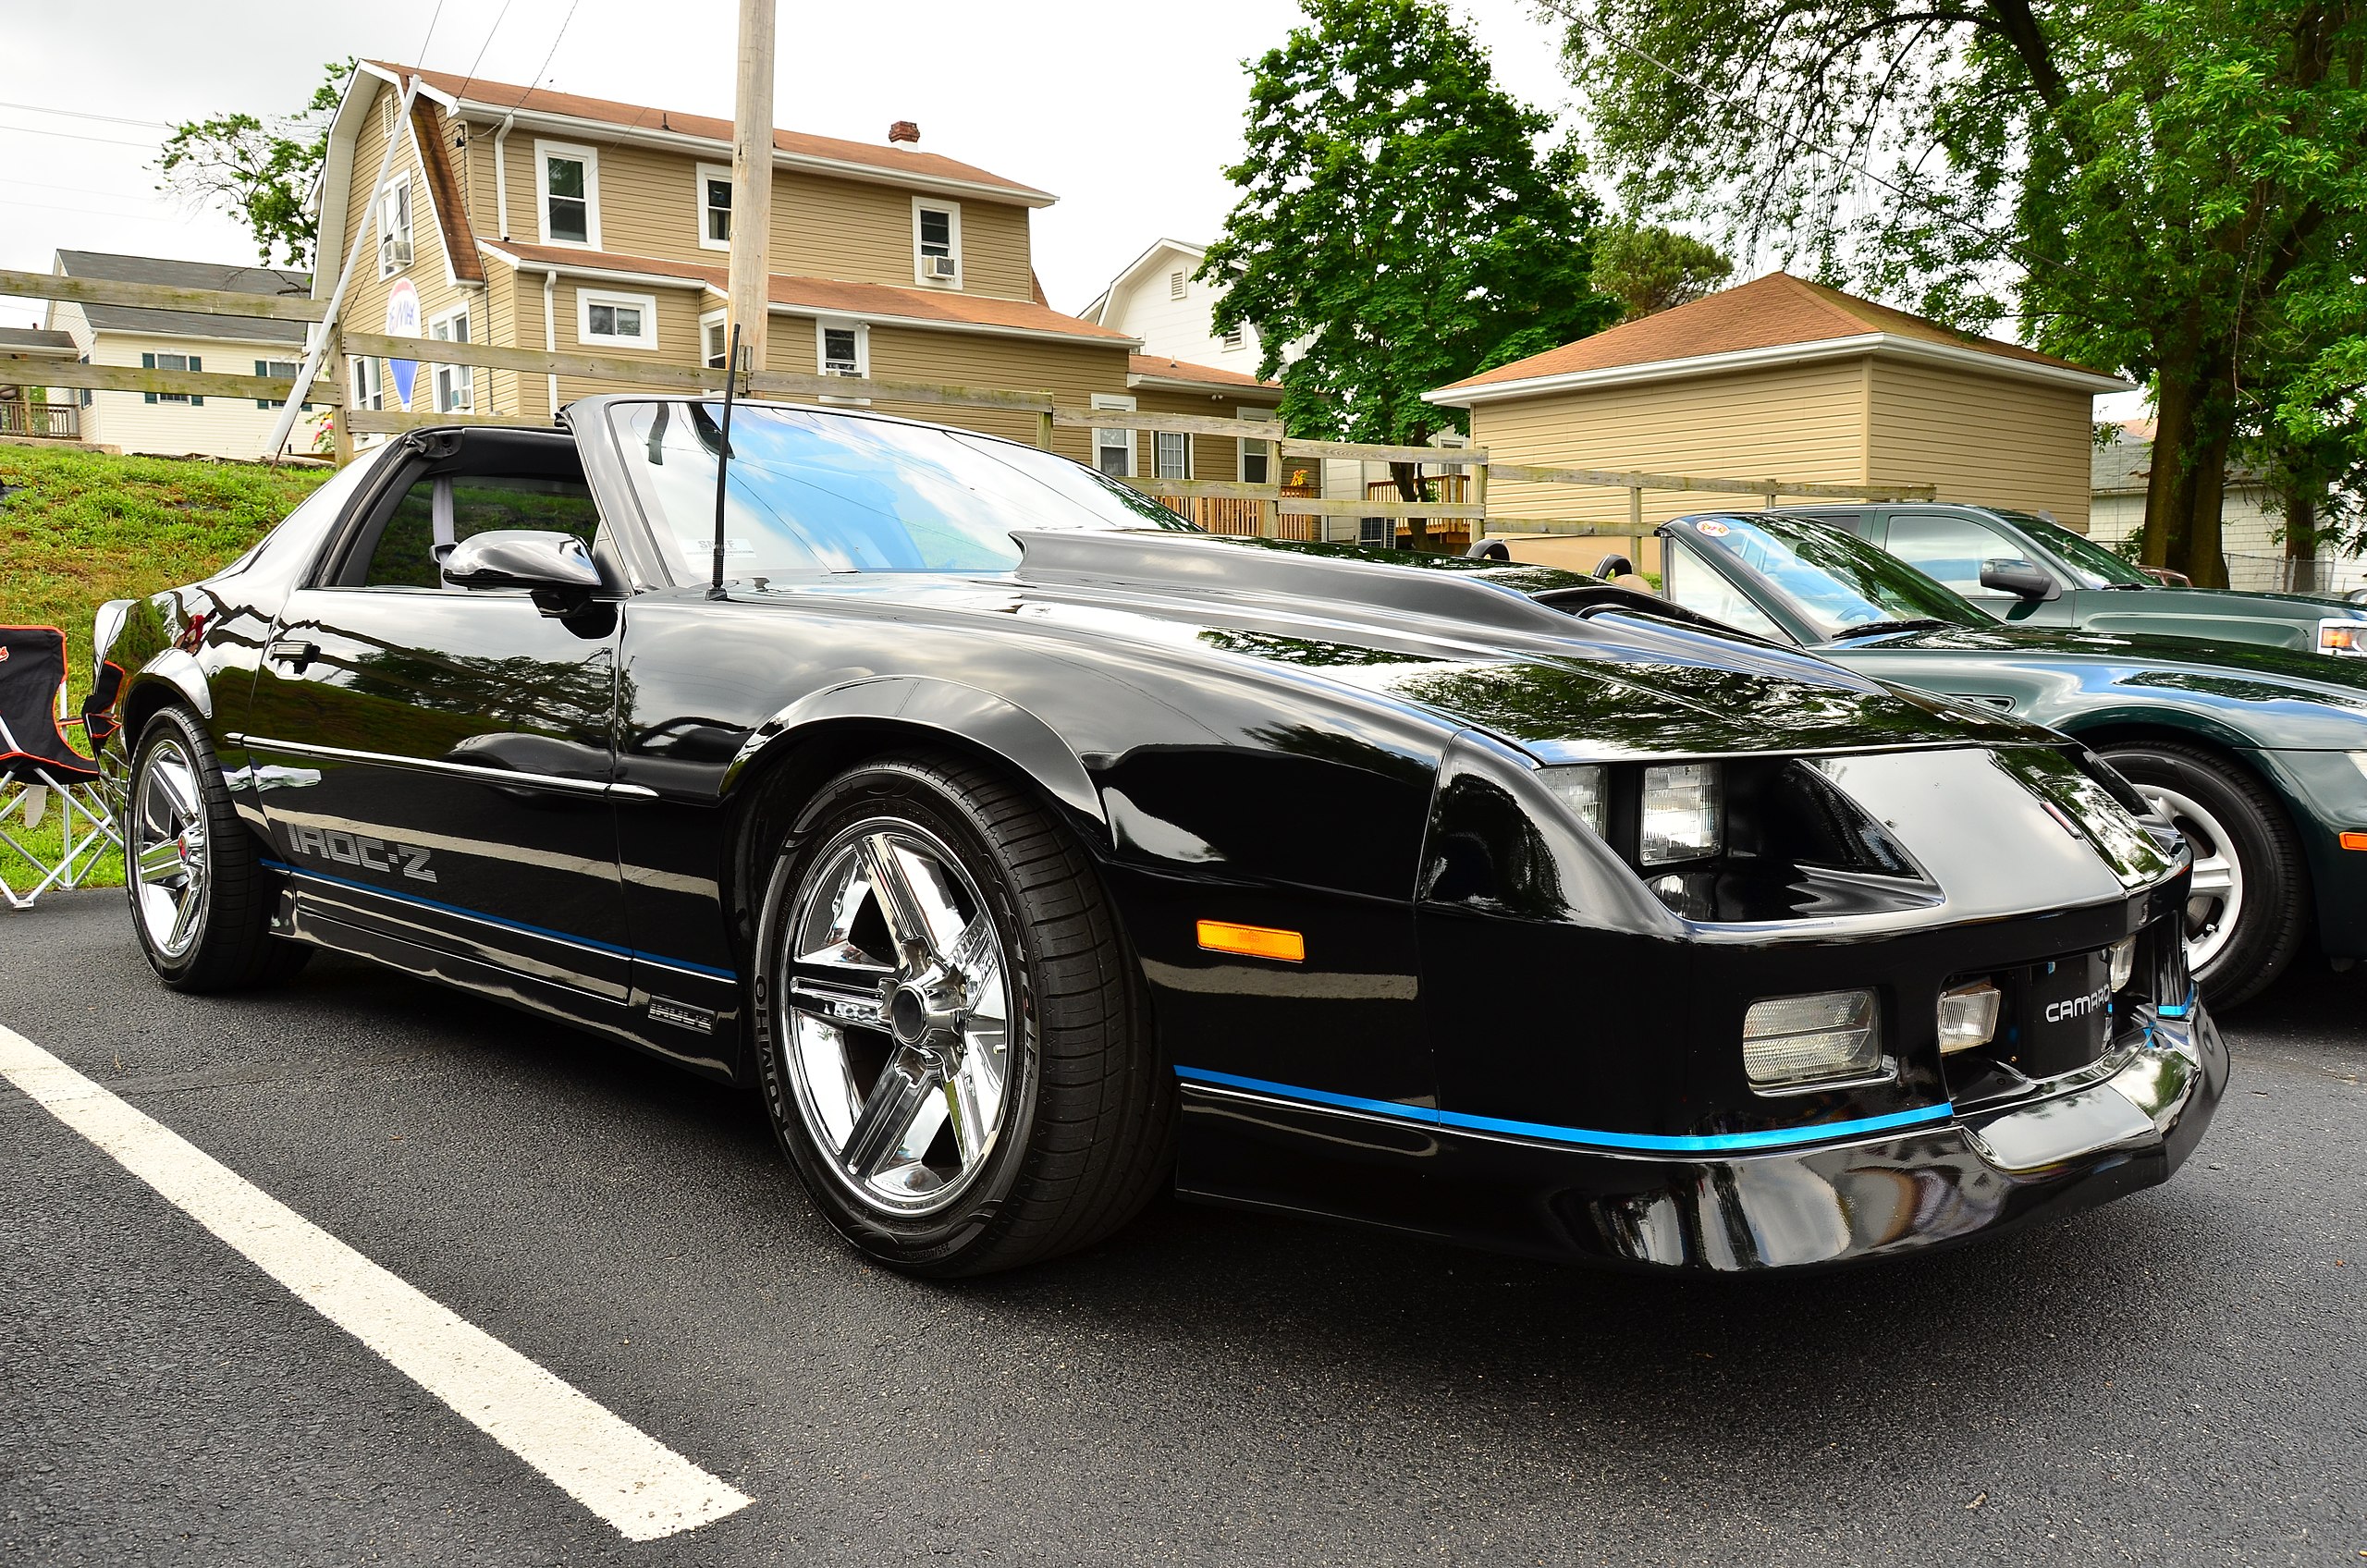 File:1989 Chevy Camaro IROC-Z With a Blue Line.jpg - Wikimedia Commons